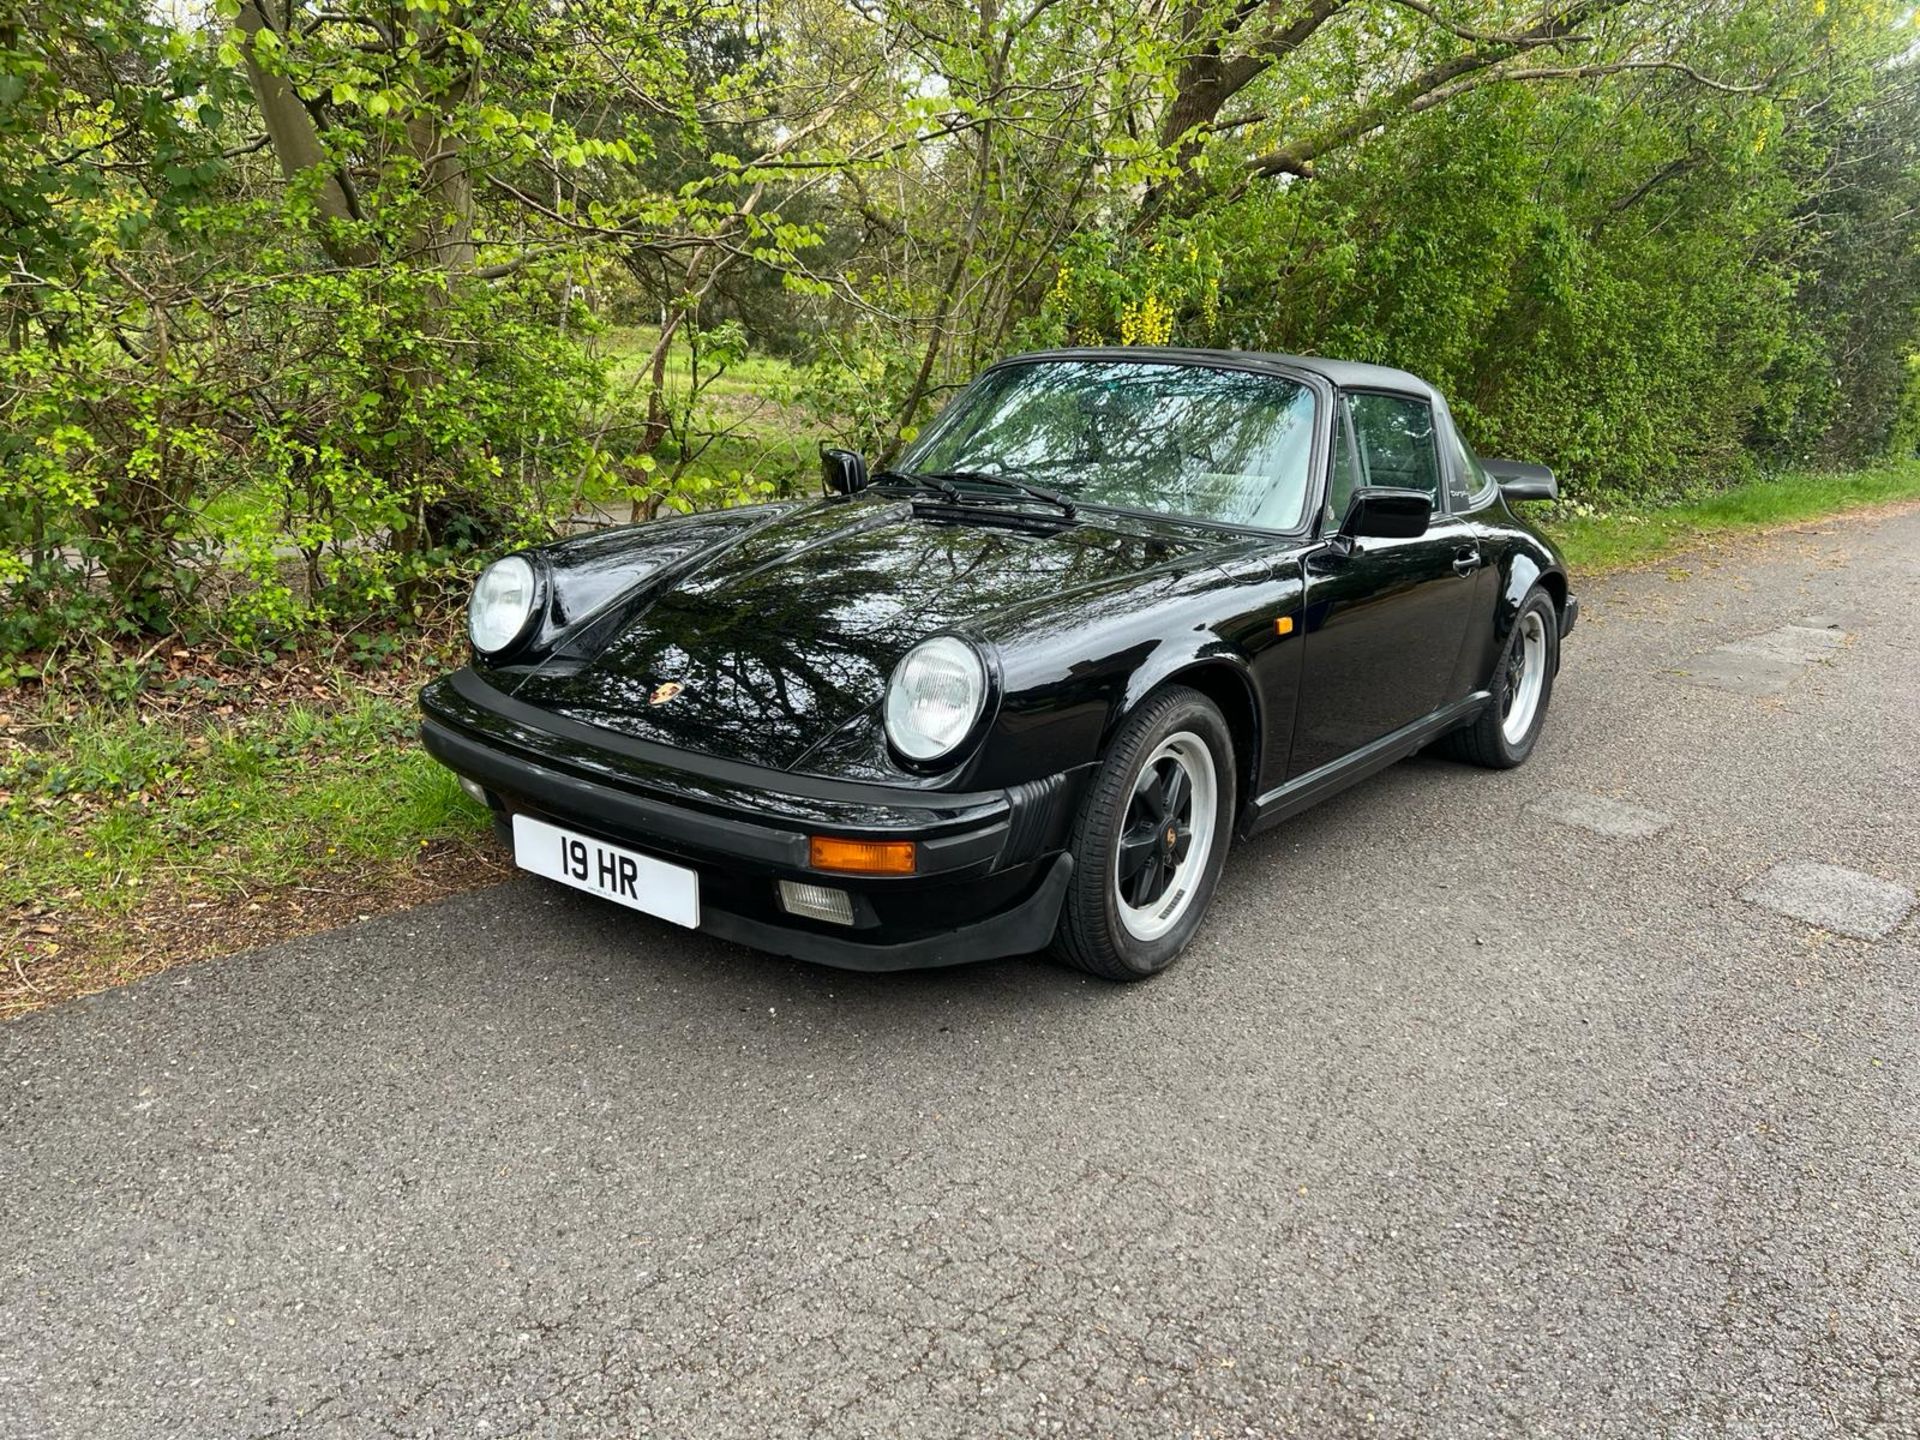 1988 Porsche Carrera Targa 3.2 - 27 yrs ownership, 61,000 miles with only 3500 miles in last 25 yrs - Image 4 of 18